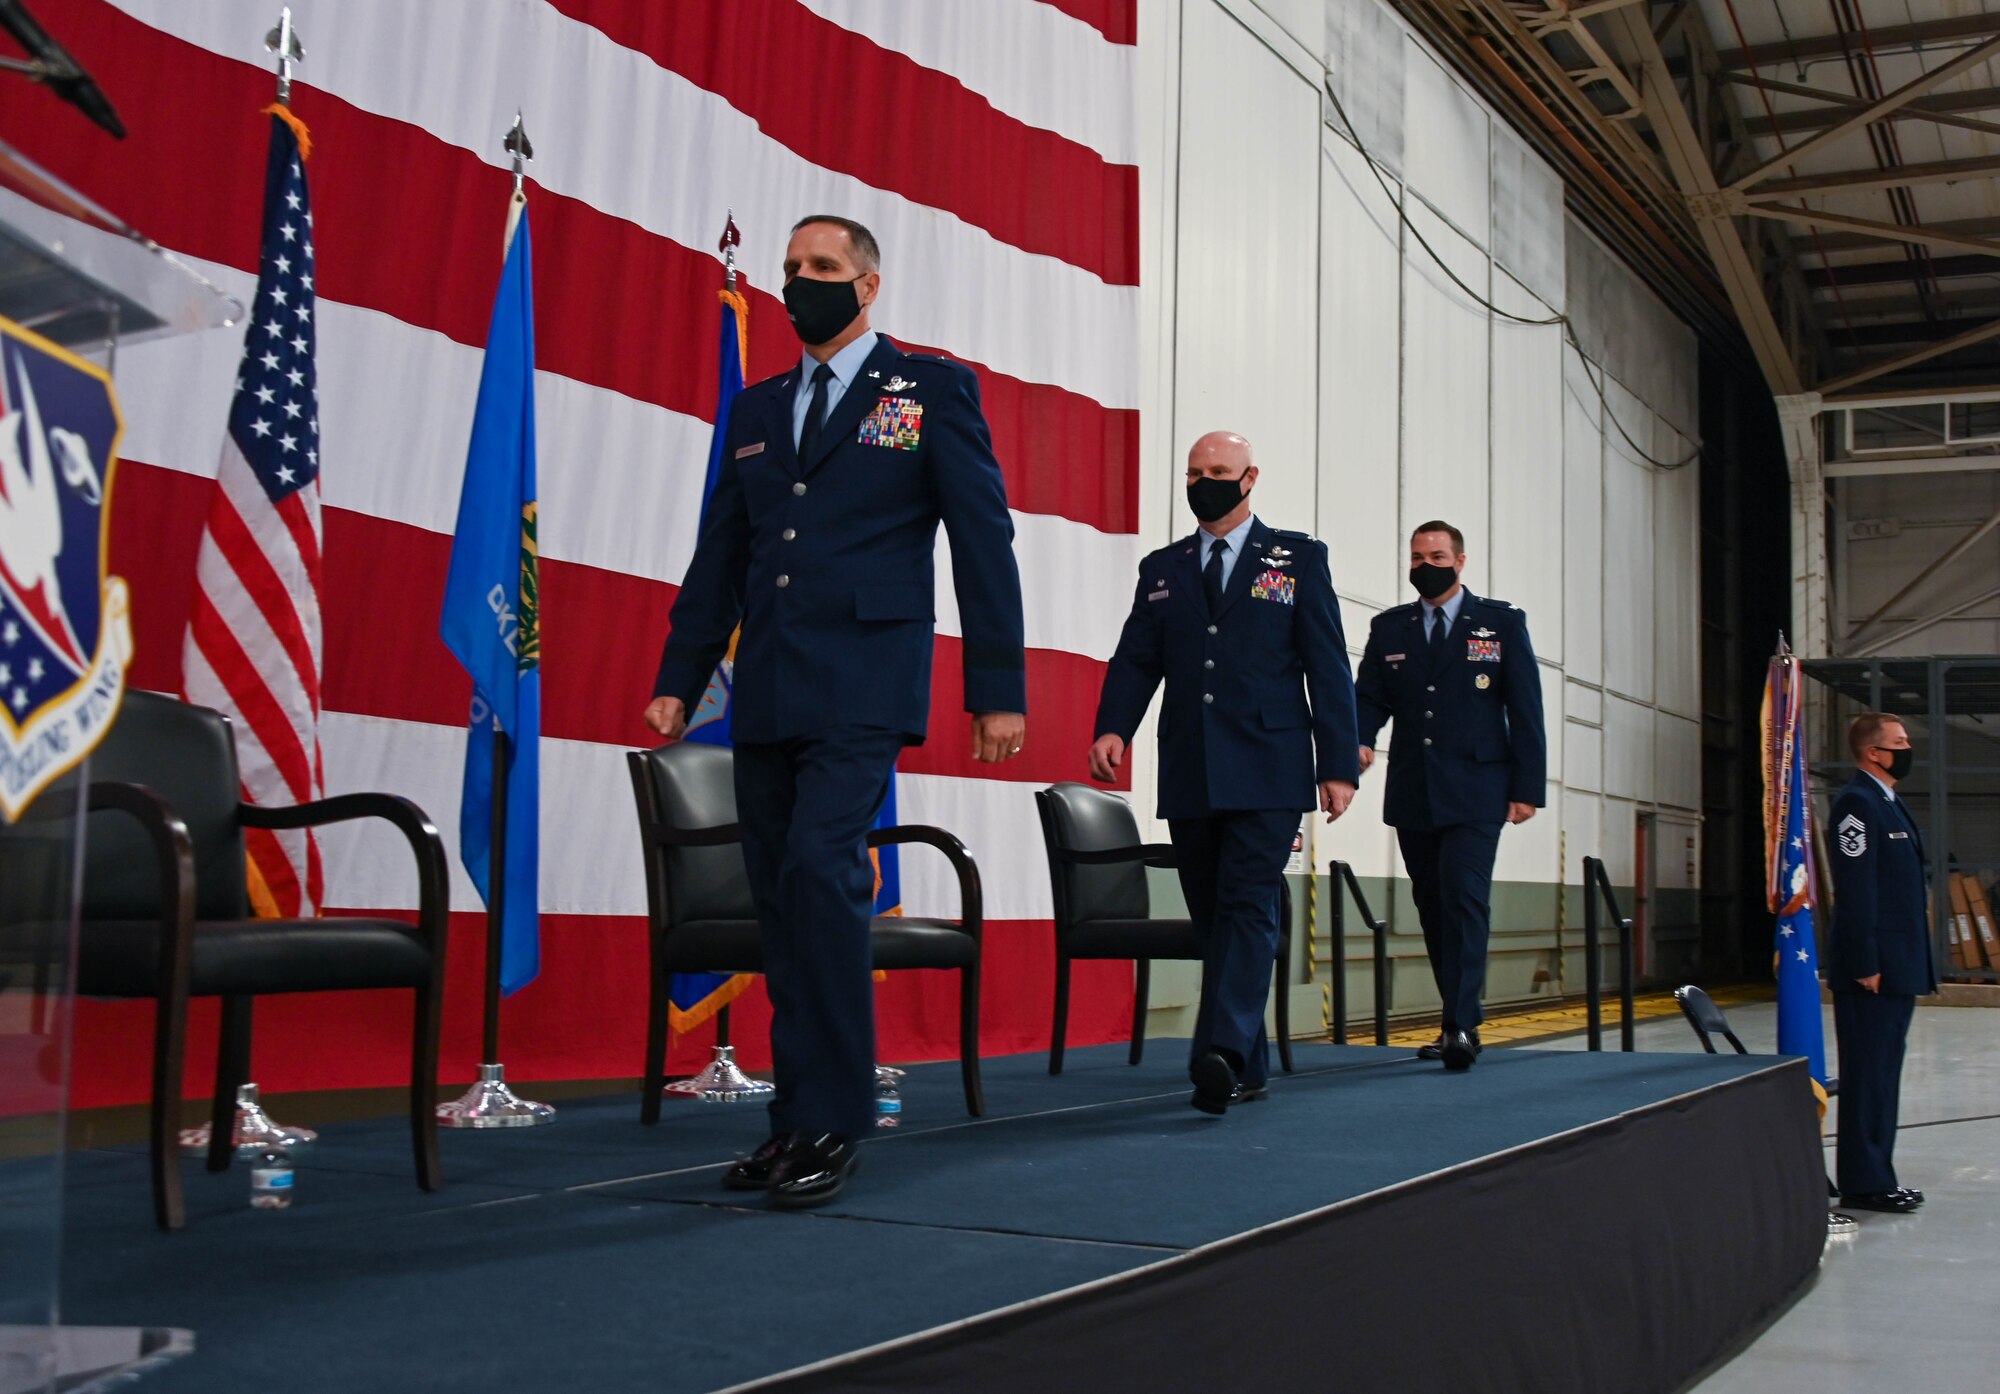 The 507th Air Refueling Wing welcomes a new wing commander, Col. Michael Parks, during a change of command ceremony Nov. 8, 2020, at Tinker Air Force Base, Oklahoma. (U.S. Air Force photo by Senior Airman Mary Begy)